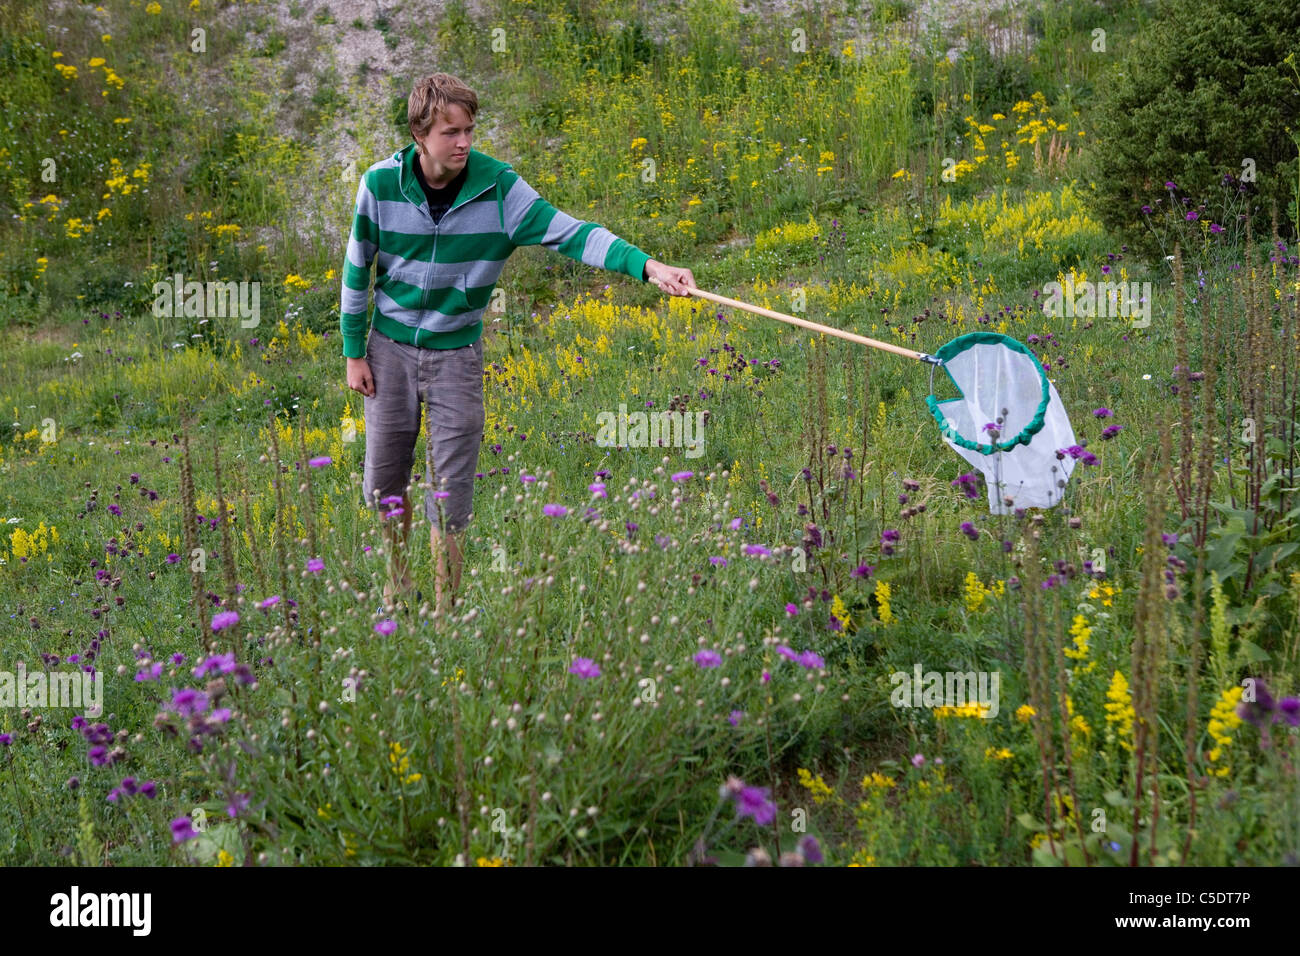 Teenage boy with net catching butterfly in the flowery meadow Stock Photo